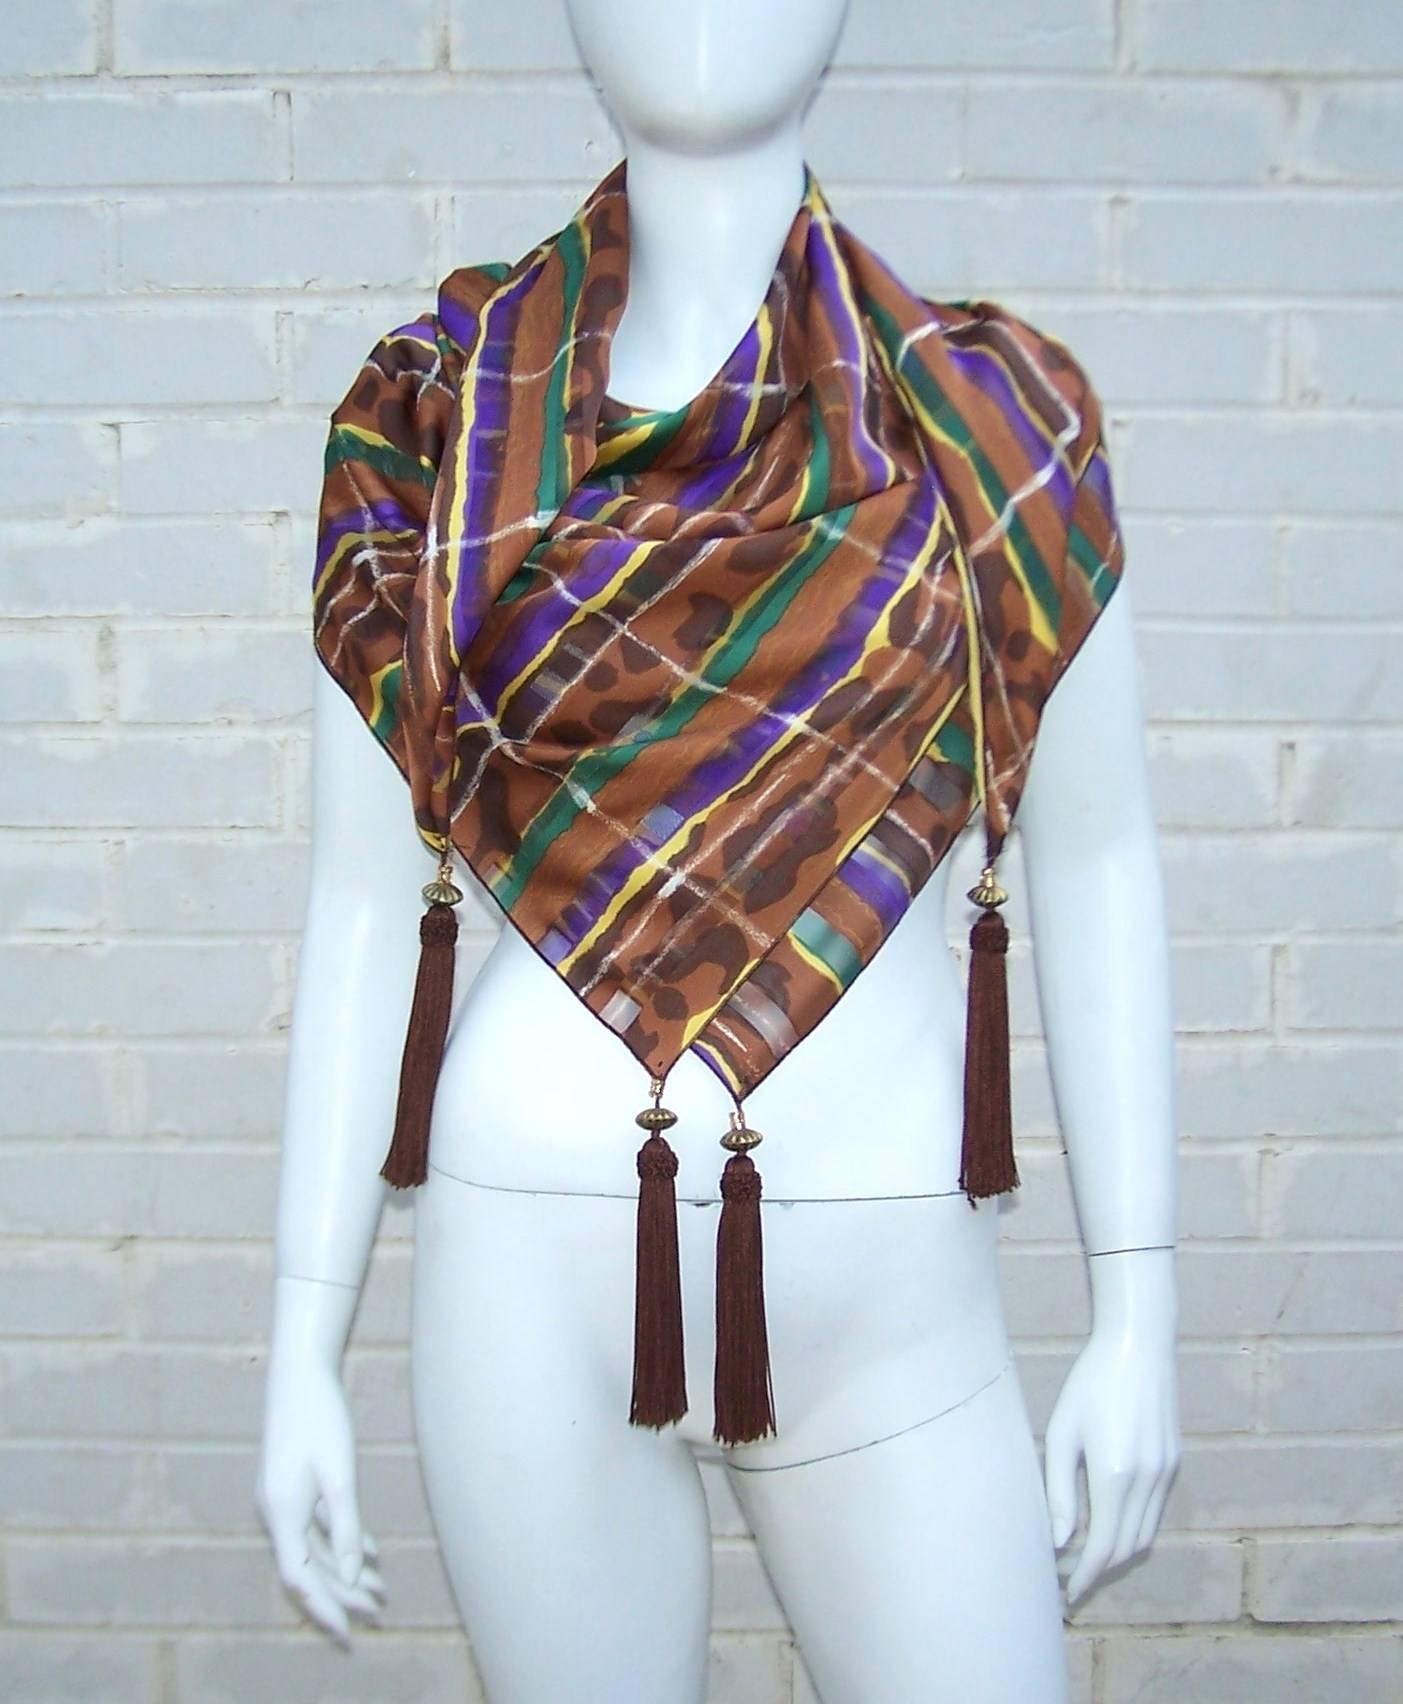 Treat this silk jacquard scarf like a piece of fashion jewelry.  The weighty brown tassels with brass beads serve to create a balance on all four corners so you can artistically drape the scarf and create many different looks.  The striped design